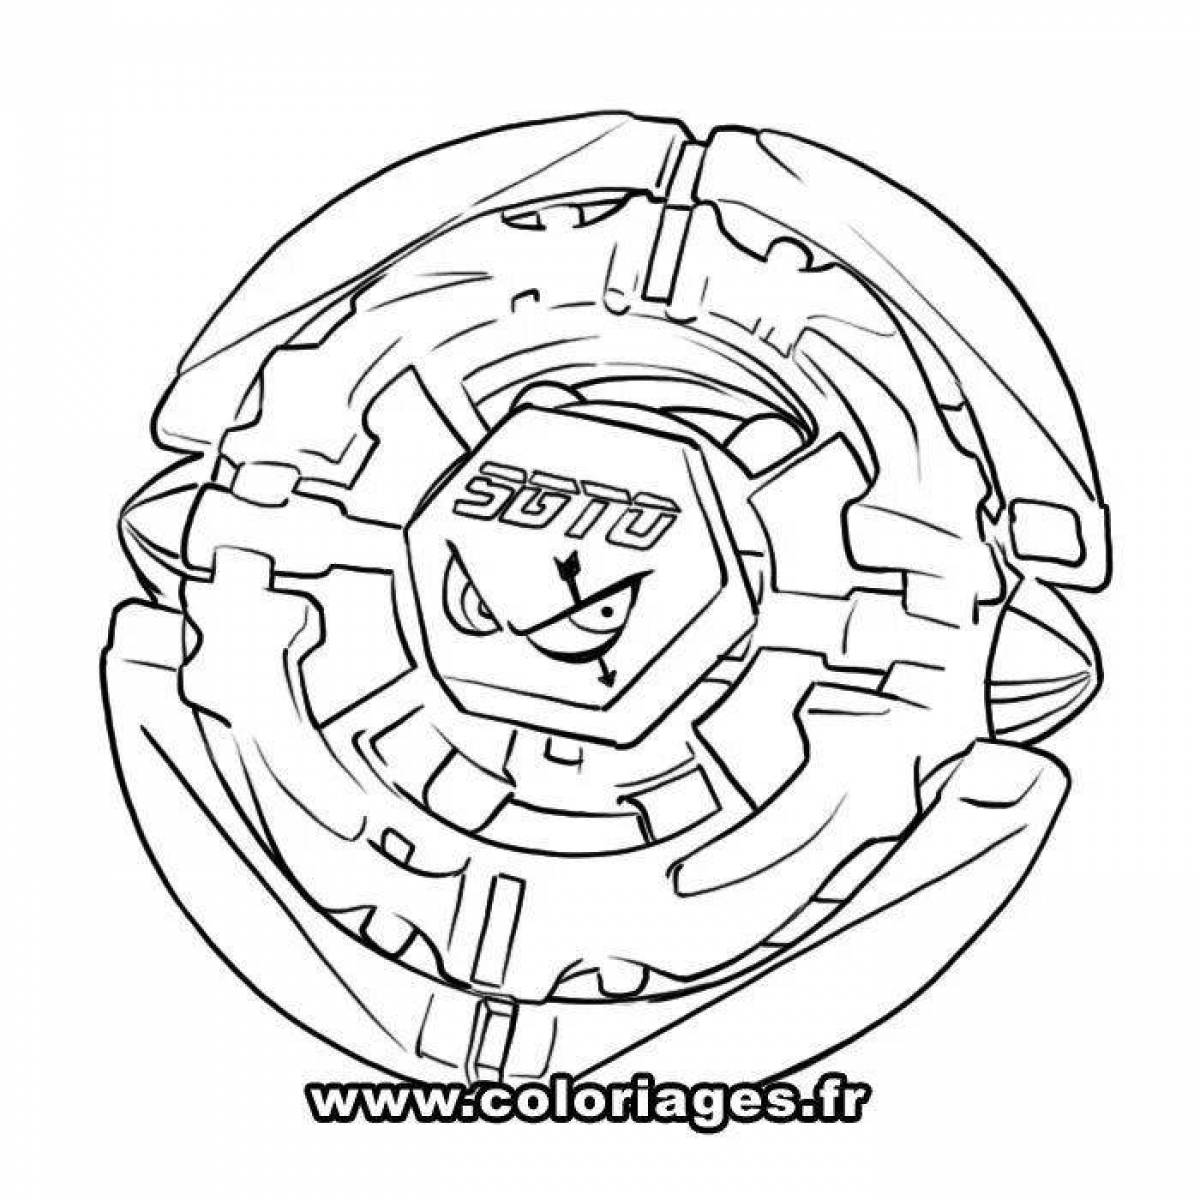 Tempting spinning top coloring page